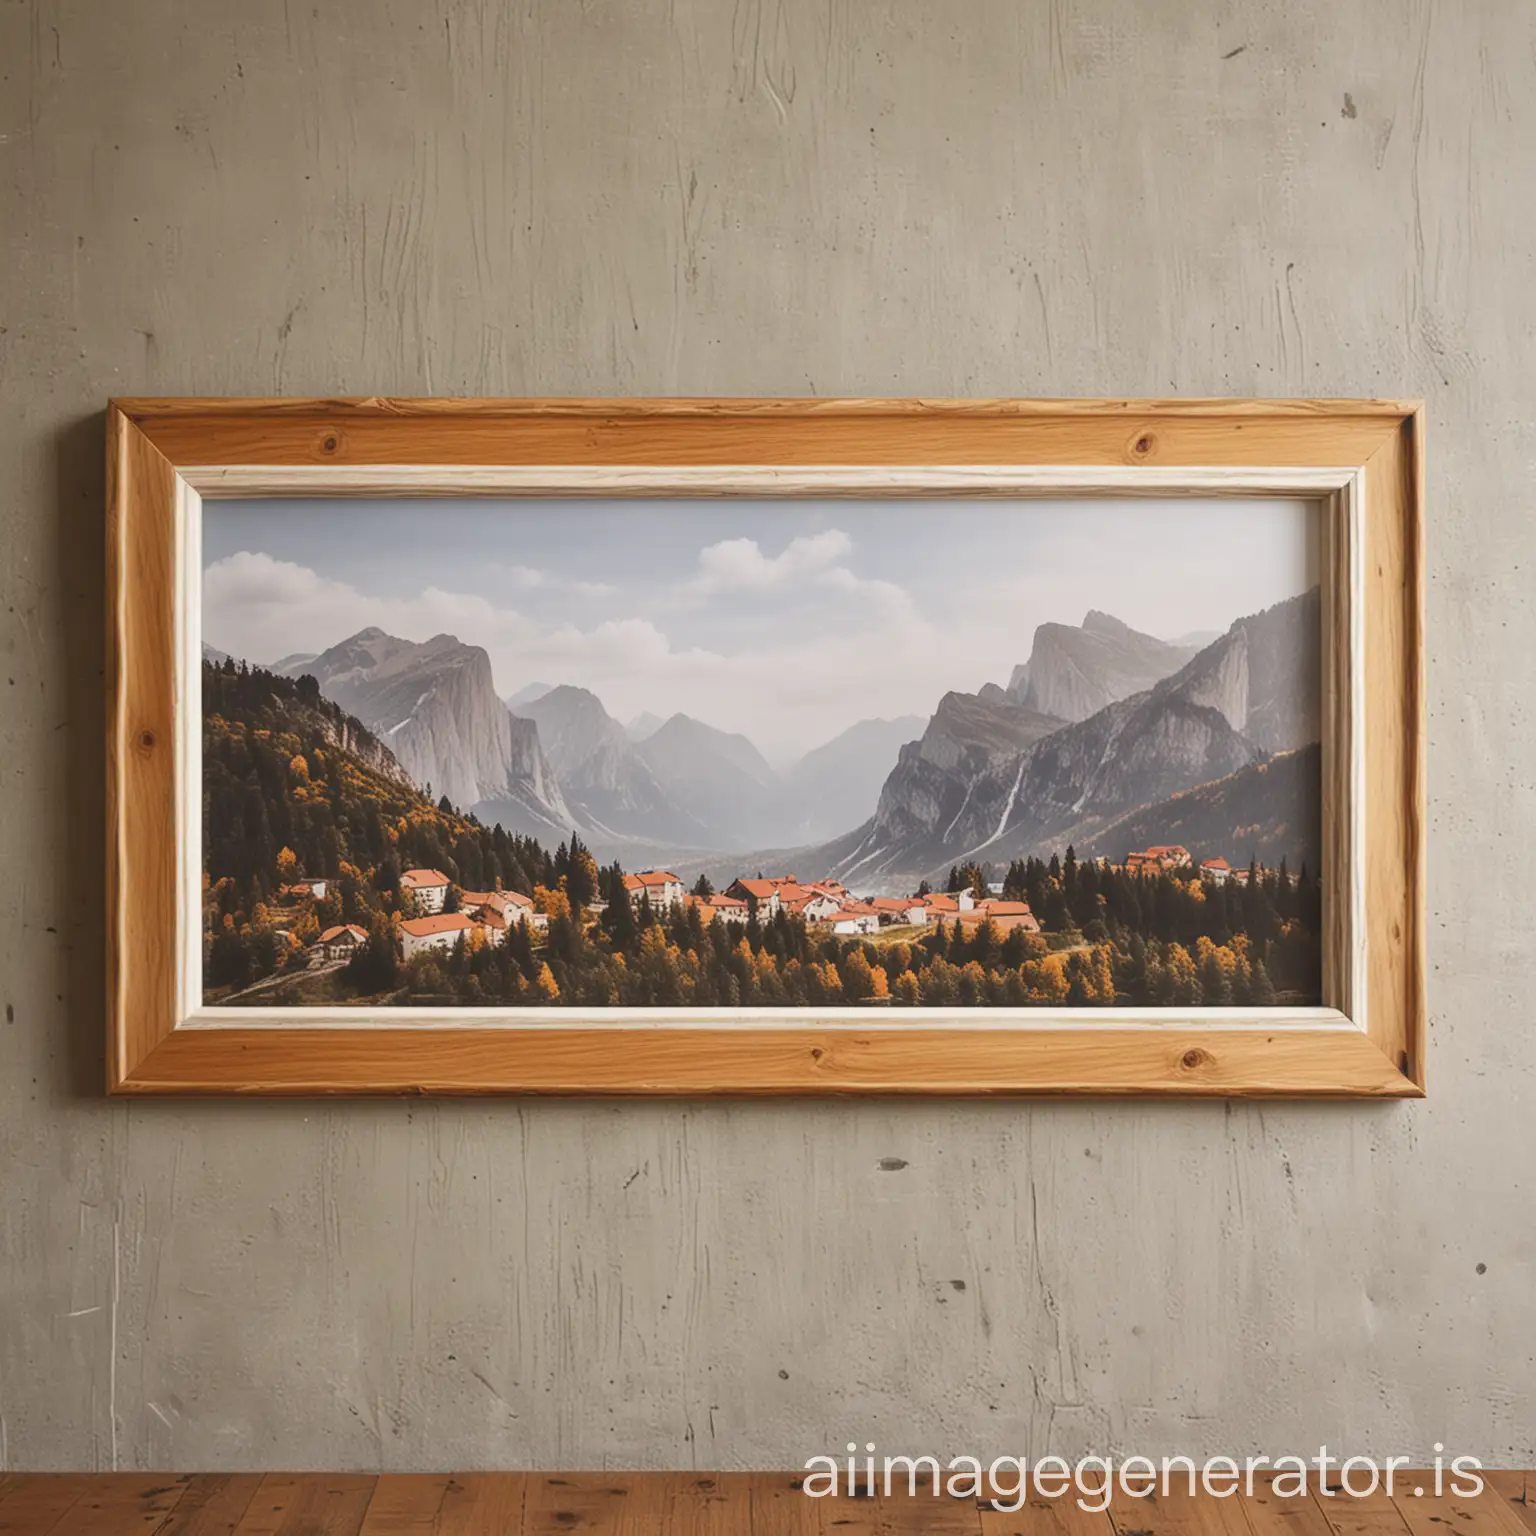 Spacious-Wooden-Picture-Frame-Adorning-Blank-Wall-in-Rustic-Landscape-Setting